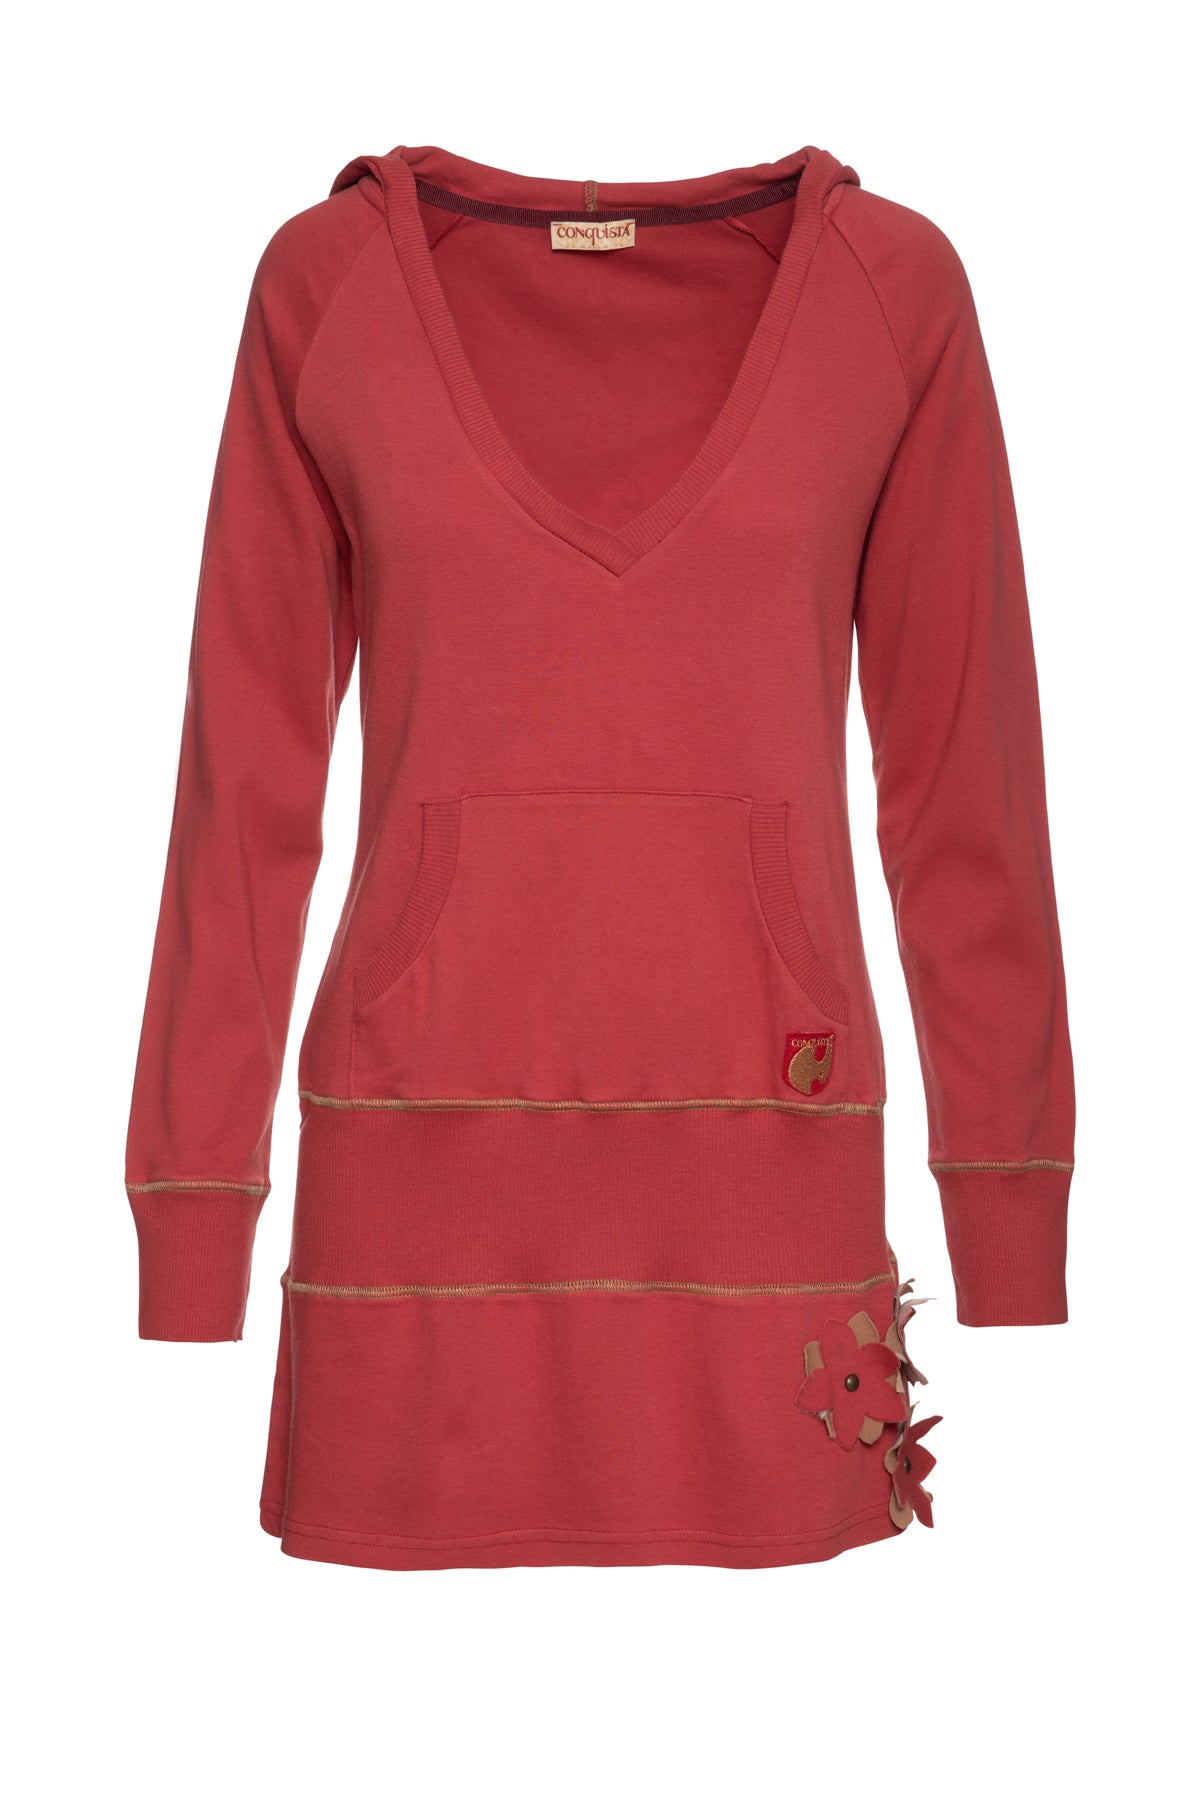 Women’s Hooded Dark Red Tunic With Appliqu Detail Extra Small Conquista